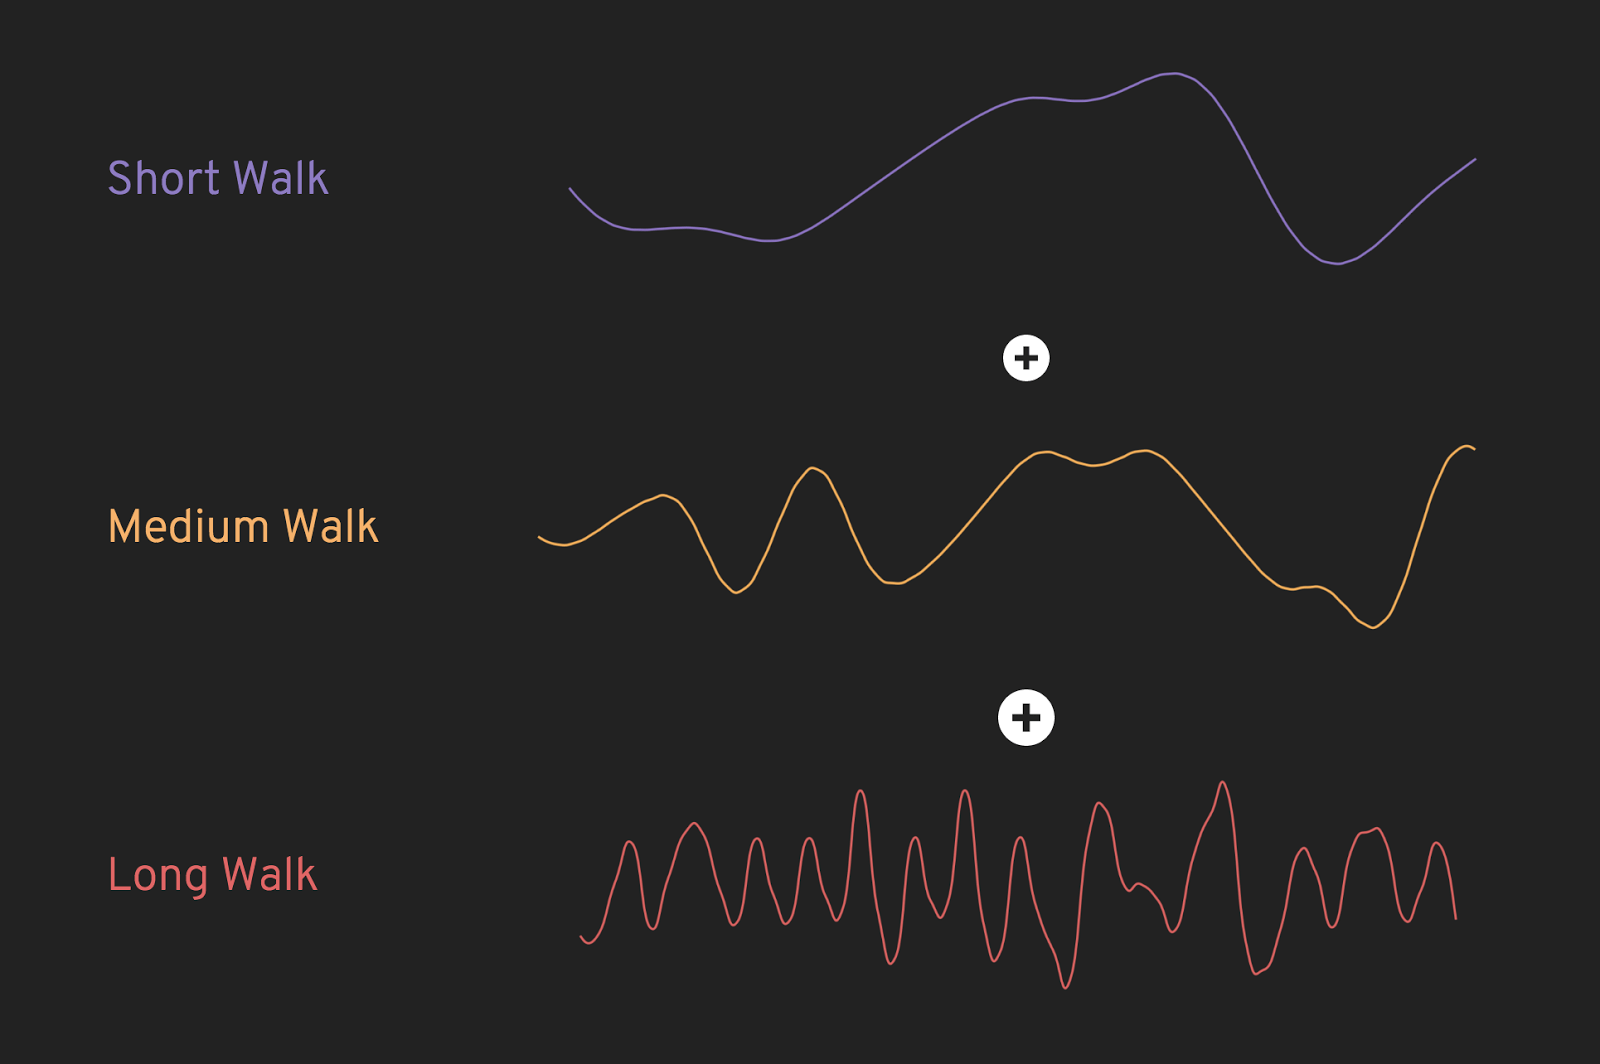 Summing different walks across the perlin noise function